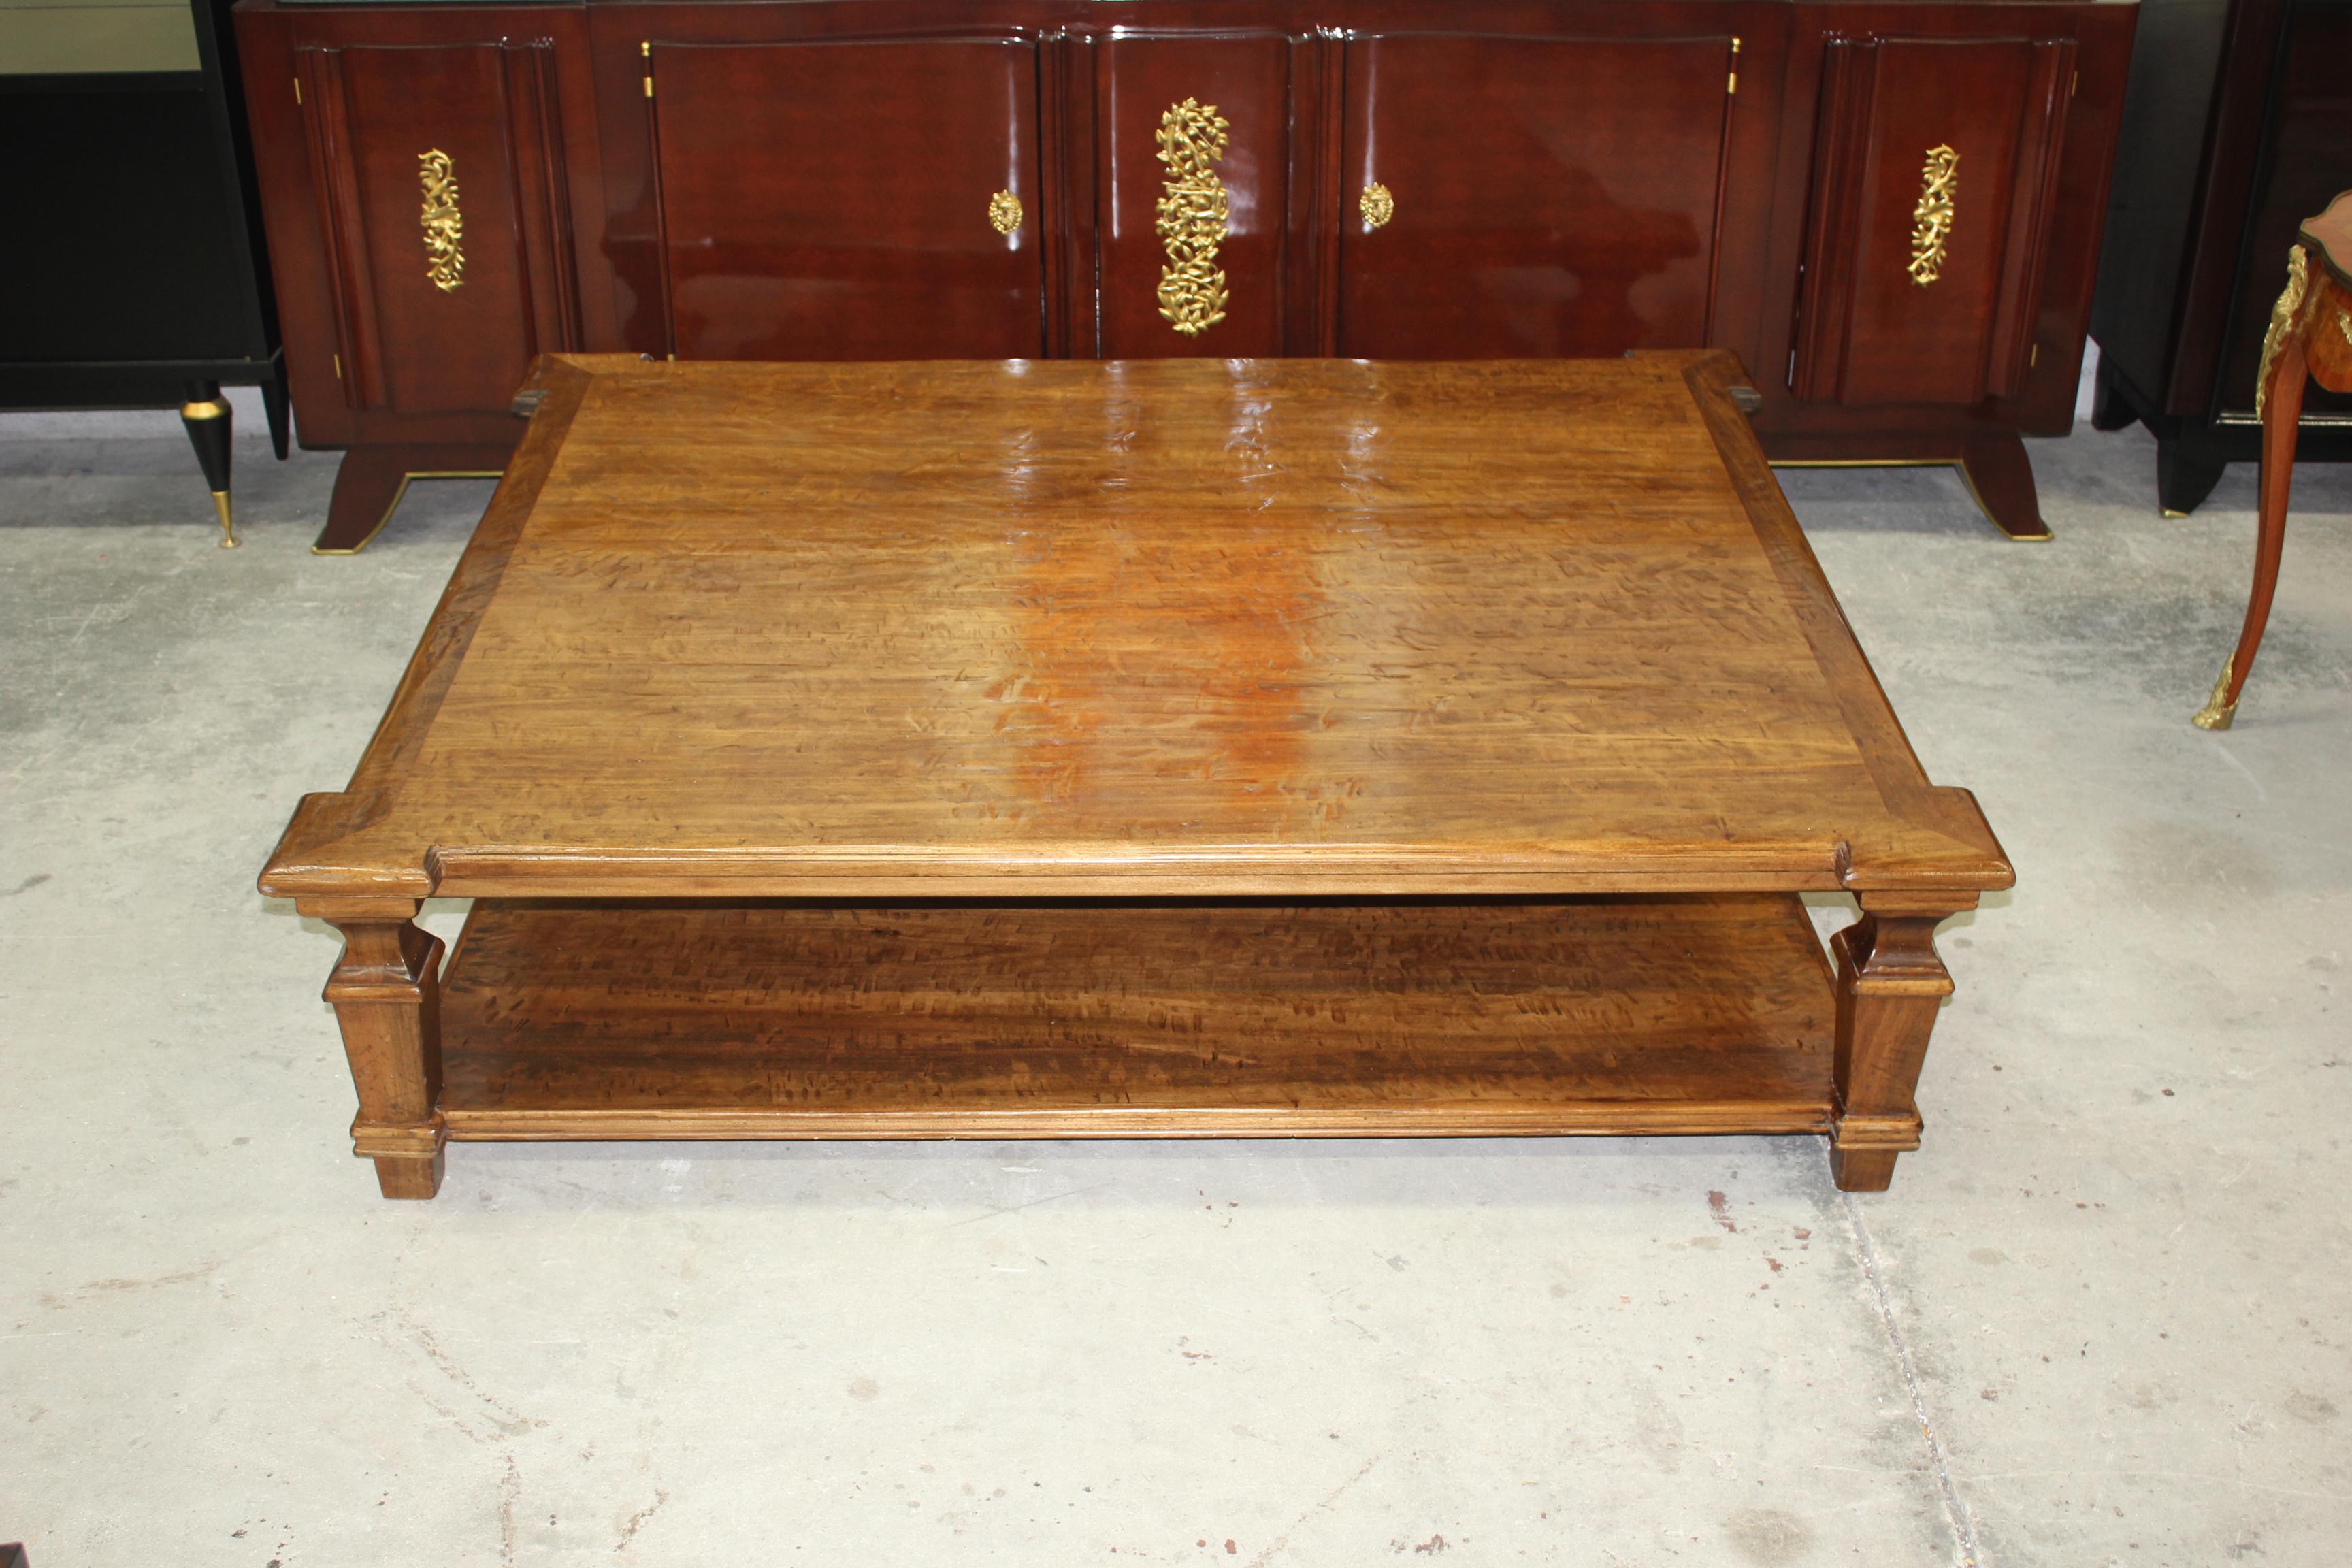 French Provincial Exceptional Huge French Country Solid Walnut Coffee Table, circa 19th Century